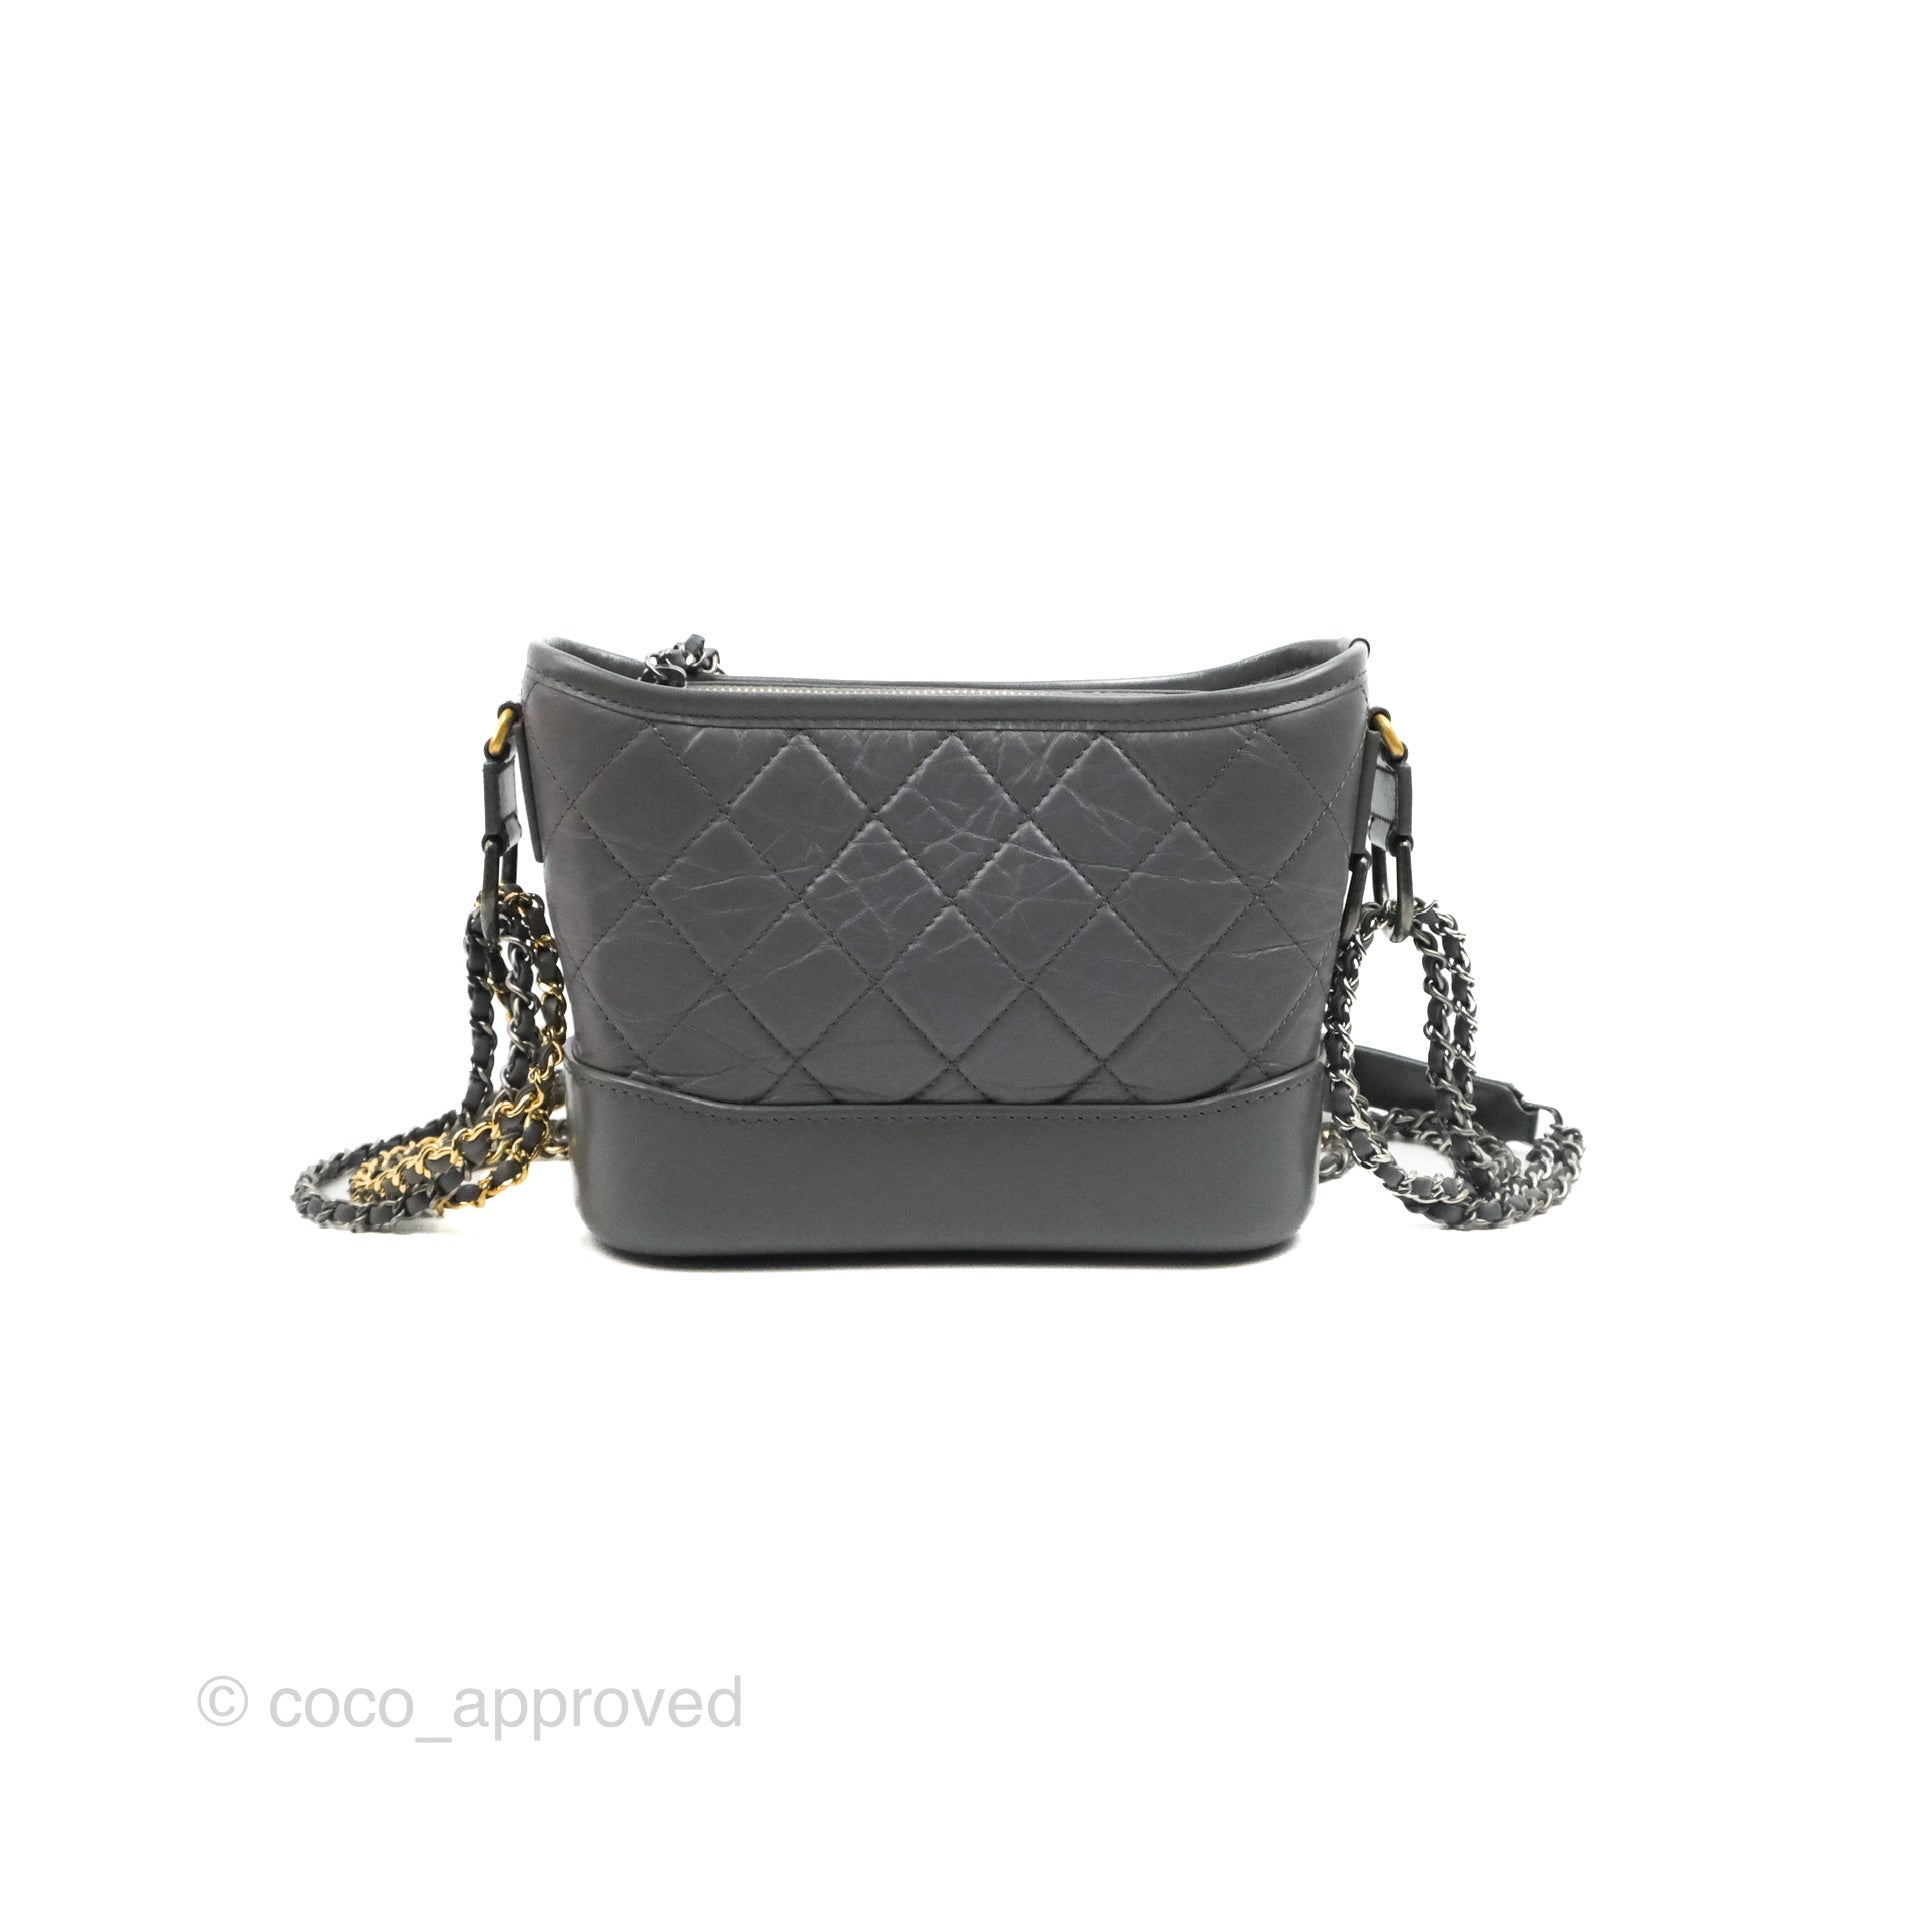 Sold at Auction: Chanel - Gabrielle Large Bag - White Leather CC Gold Silver  Quilted Hobo